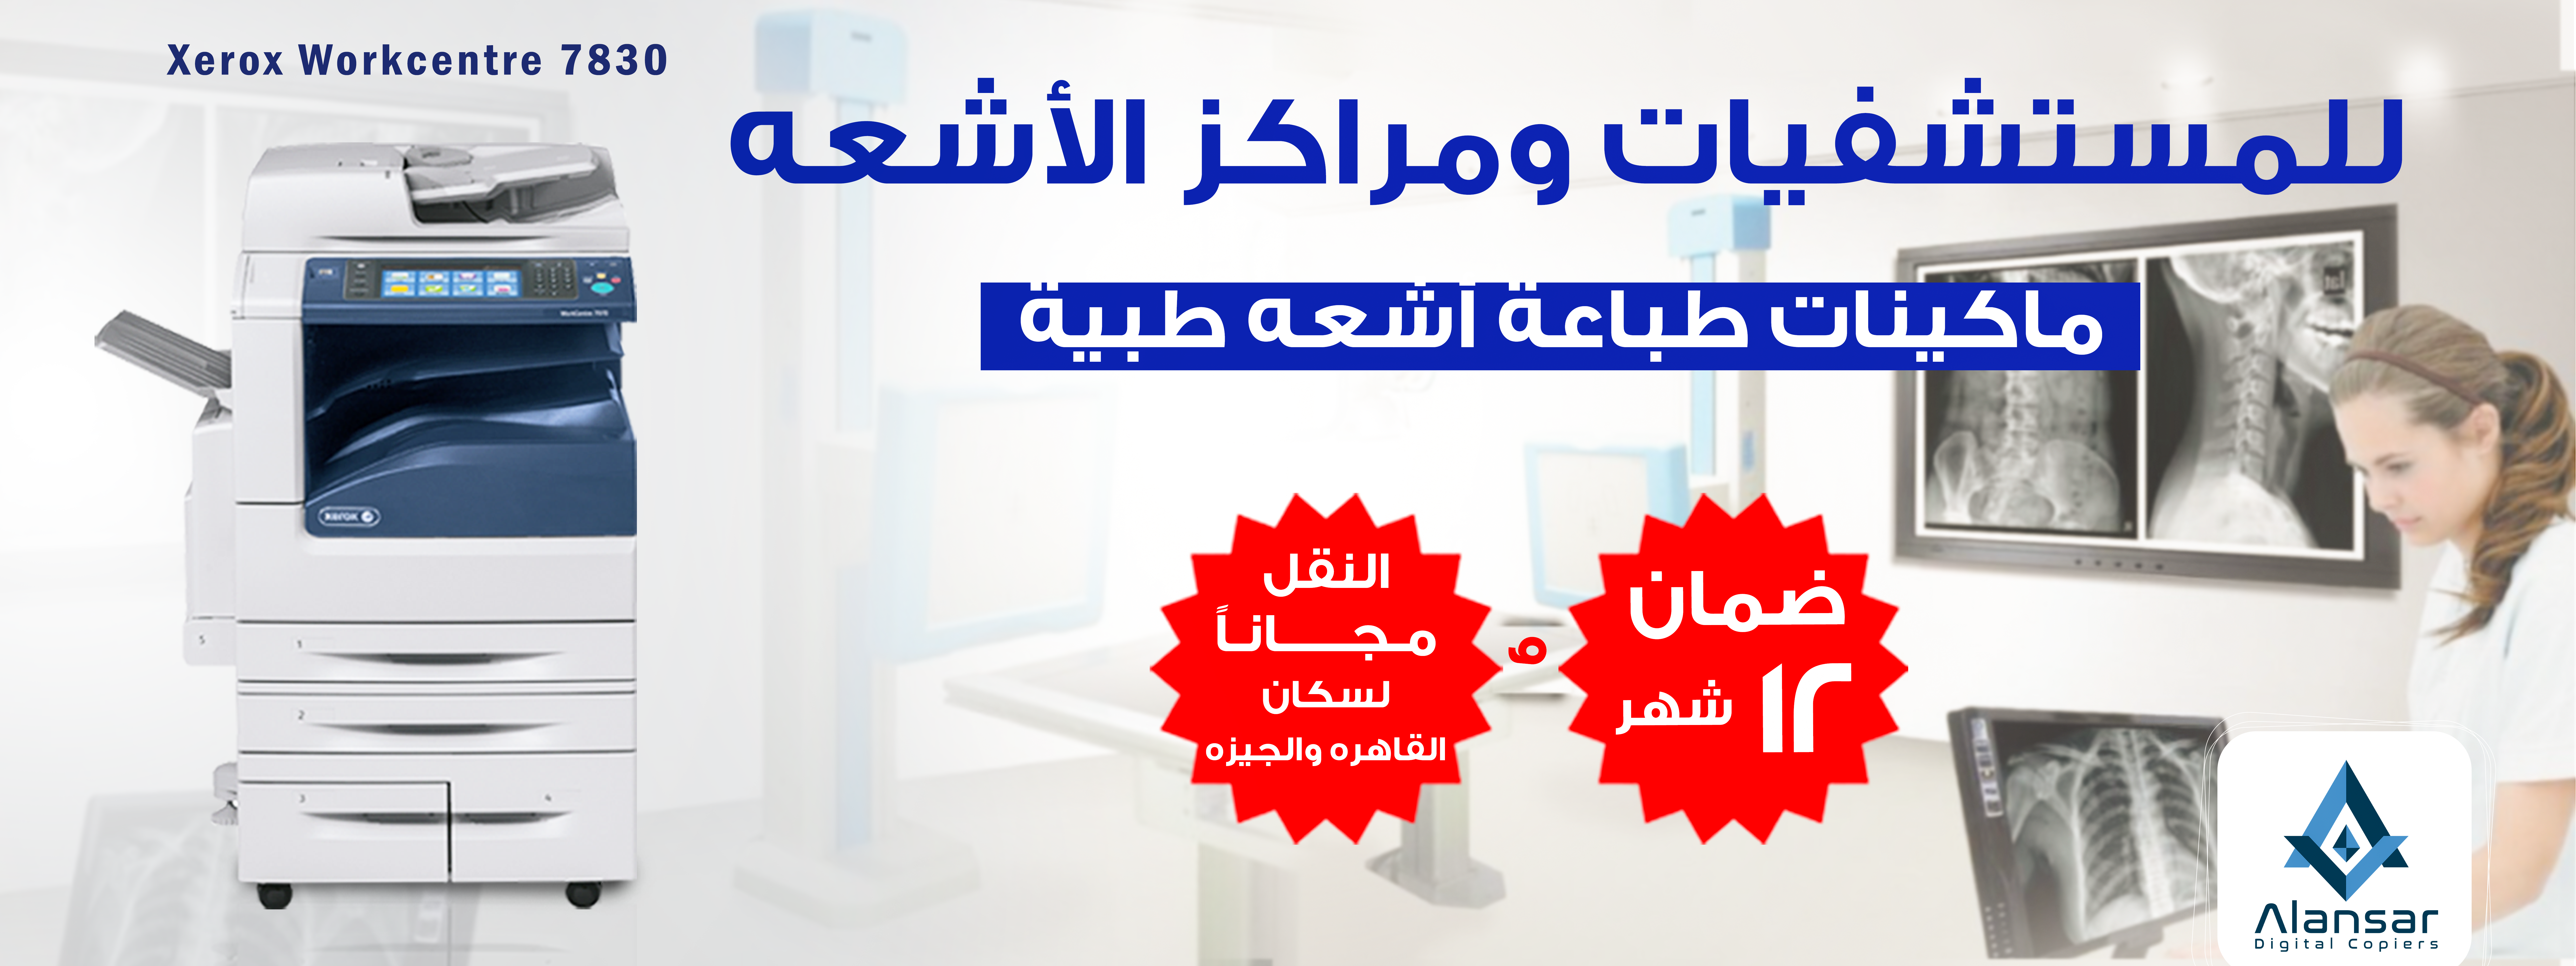 Al-Ansar Company makes a special offer on medical radiology printing machines